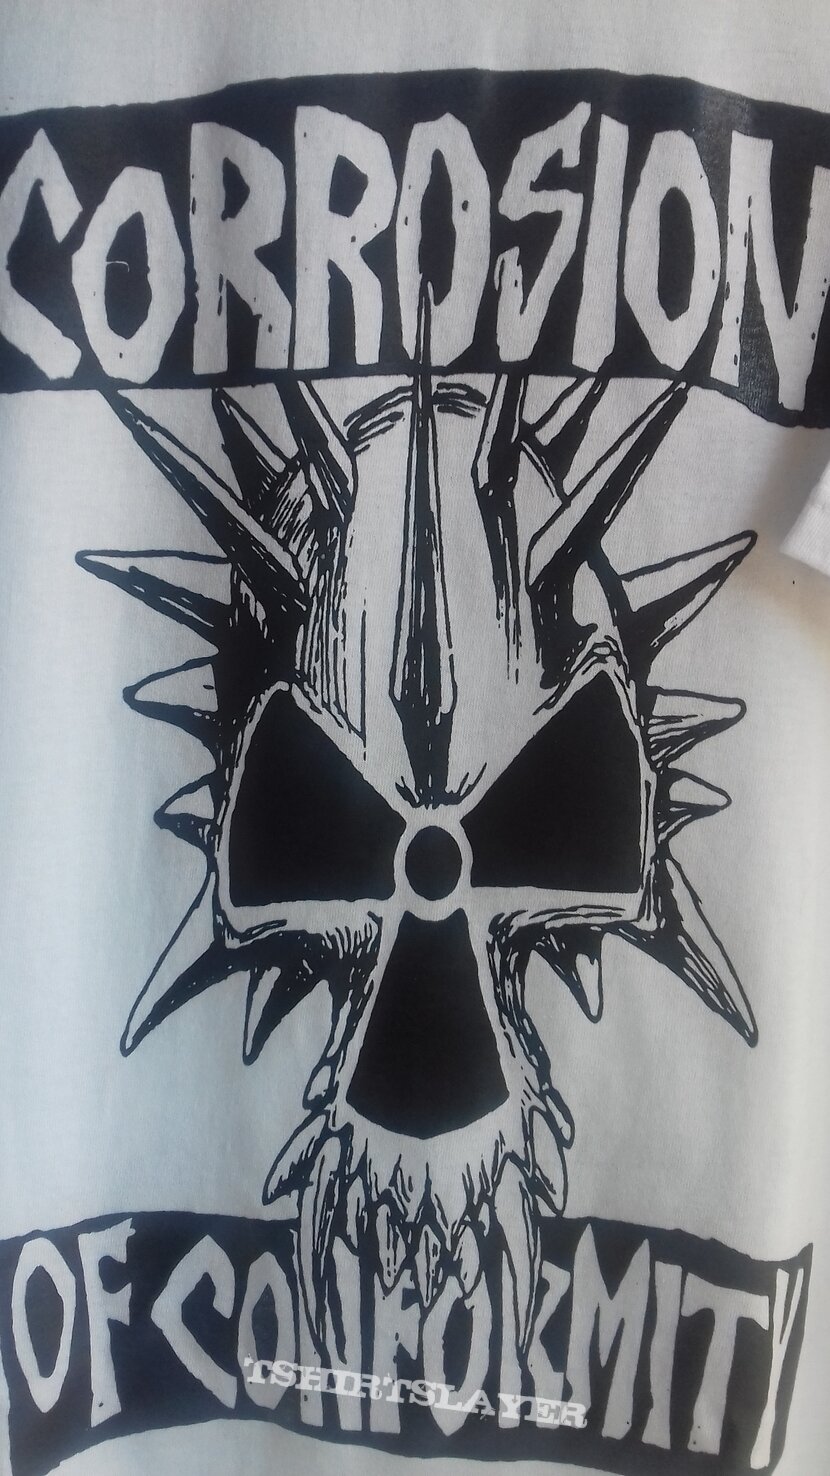 Corrosion Of Conformity Eye For An Eye White